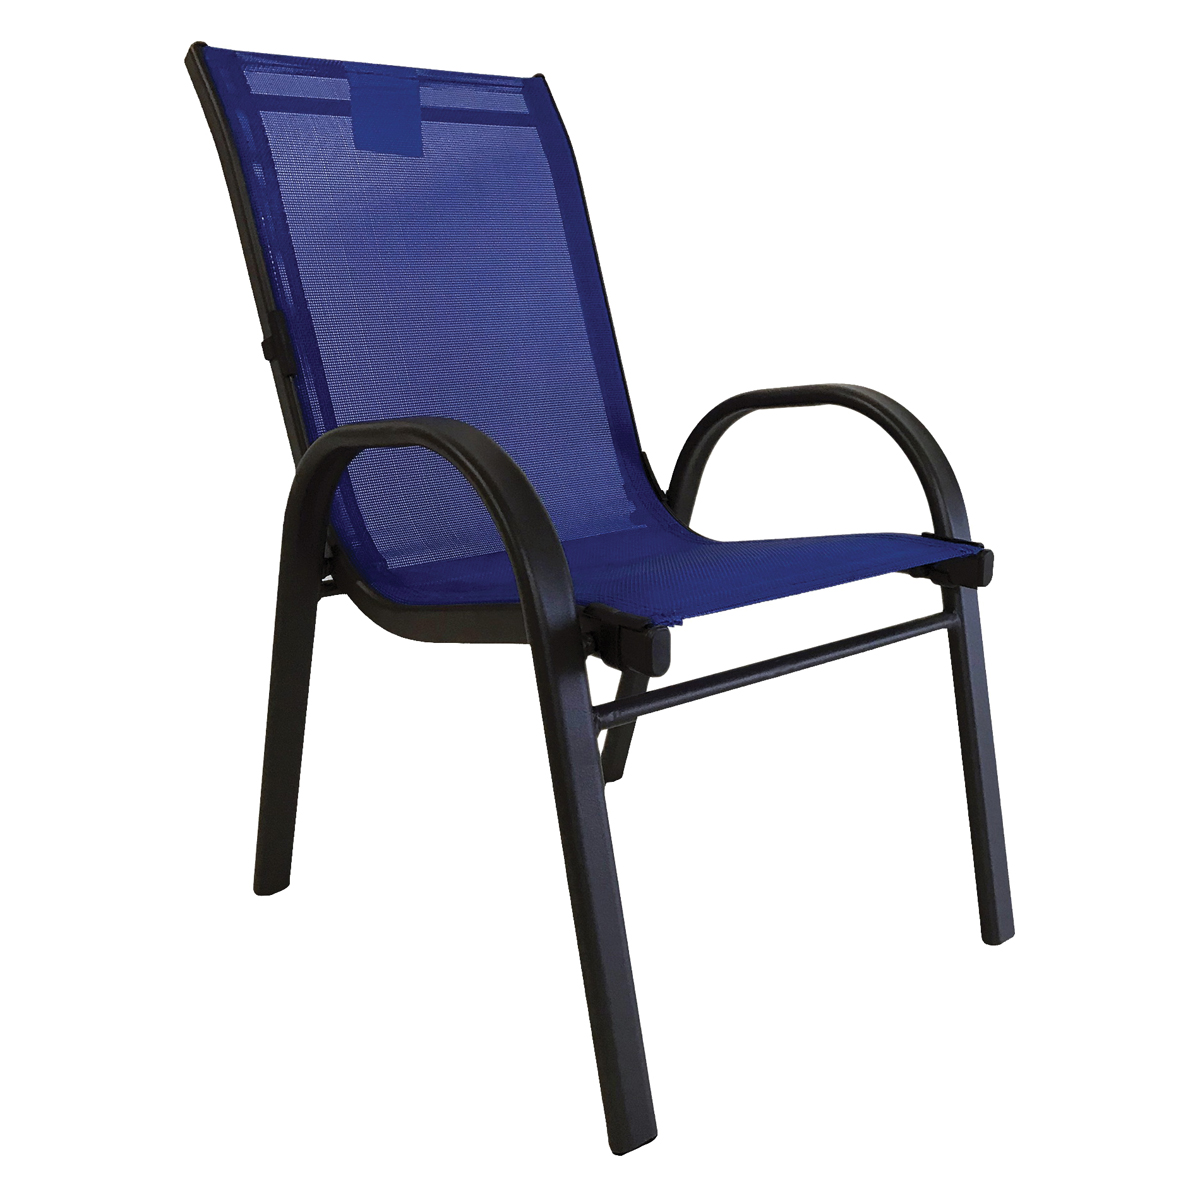 50483 Kid's Stack Chair, 2 to 6 years, Bright Blue, 23.03 in OAH